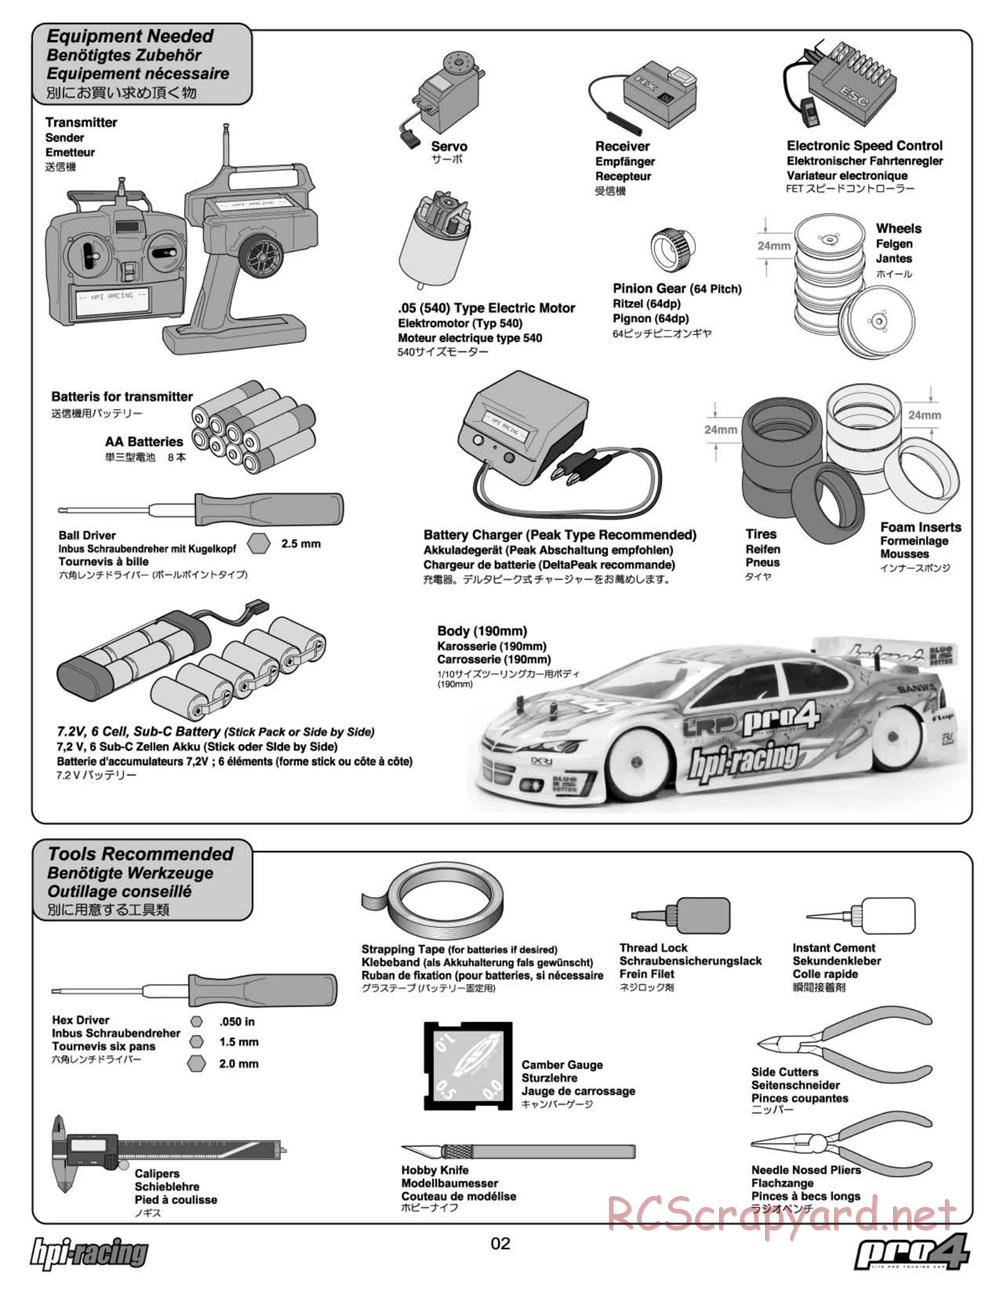 HPI - RS4 Pro4 - Manual - Page 2